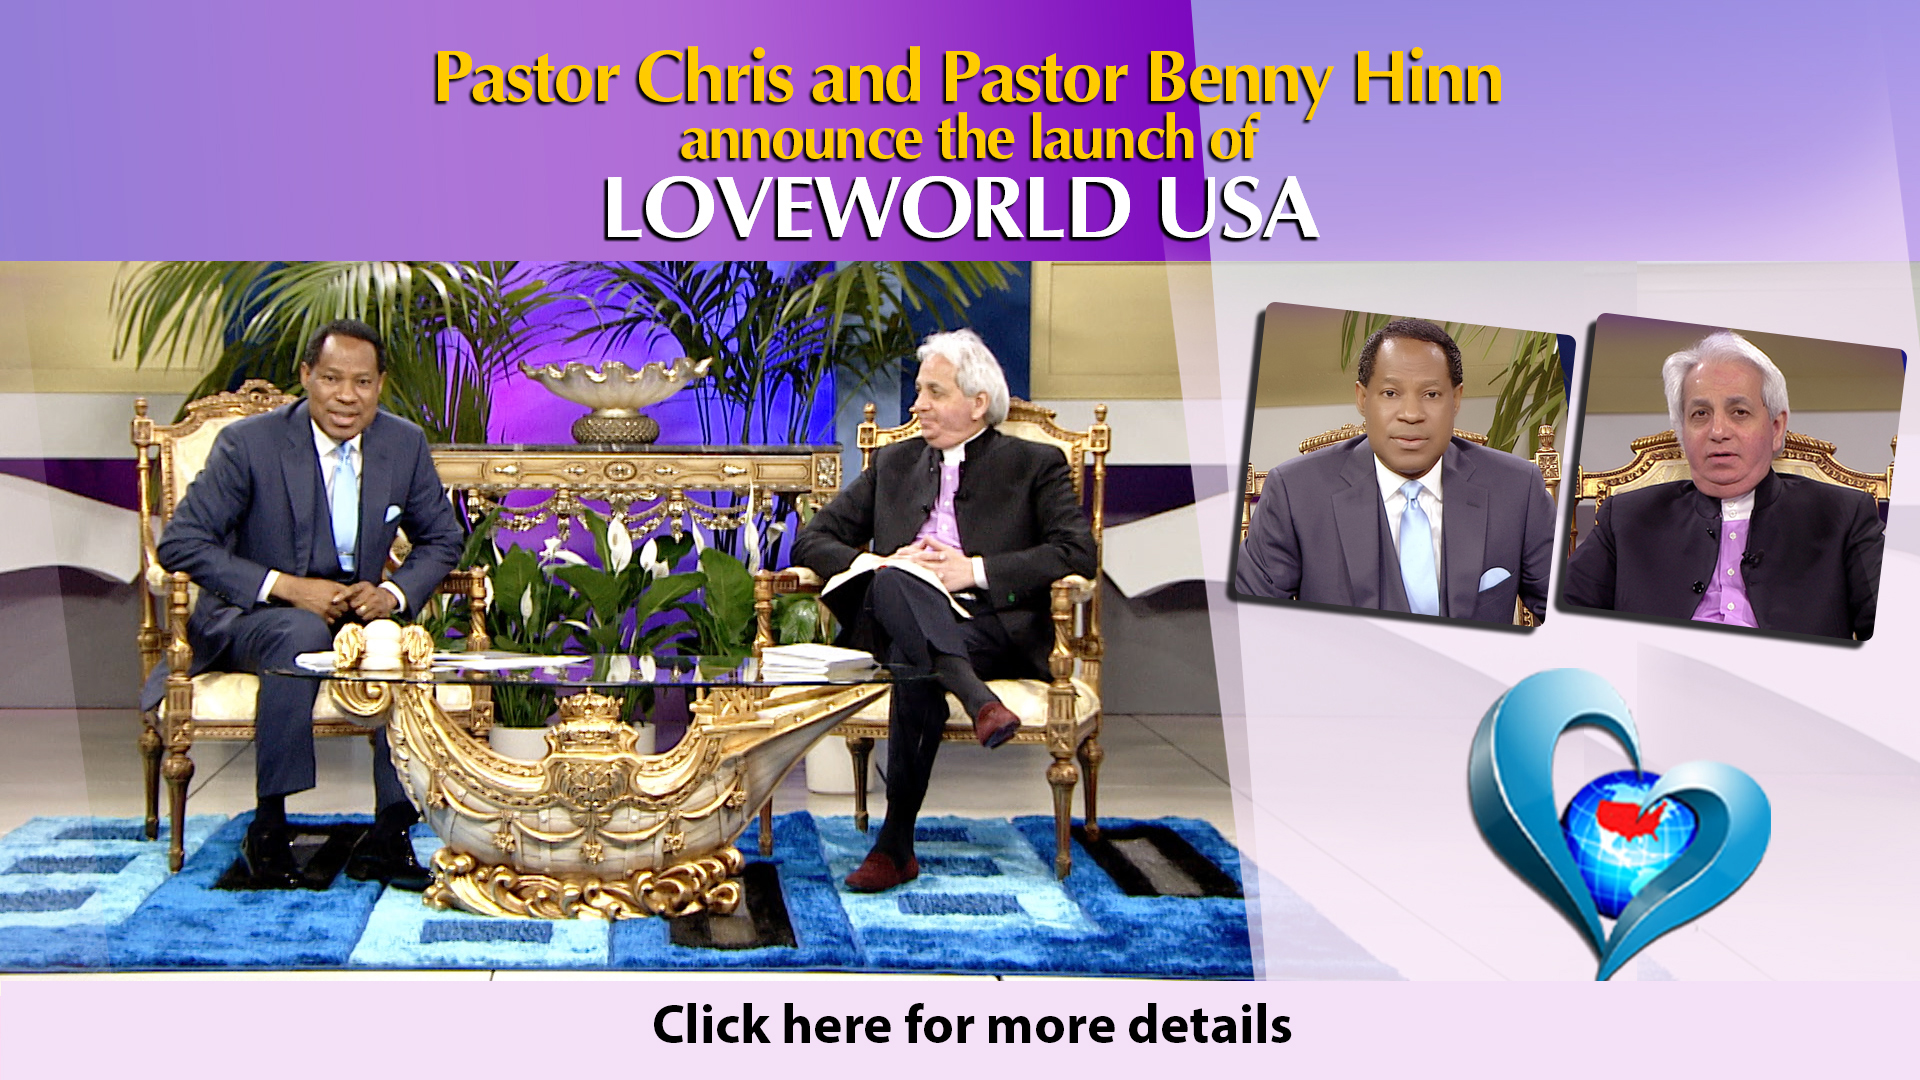 Pastor Chris and Pastor Benny Announces the Lunch Loveworld USA